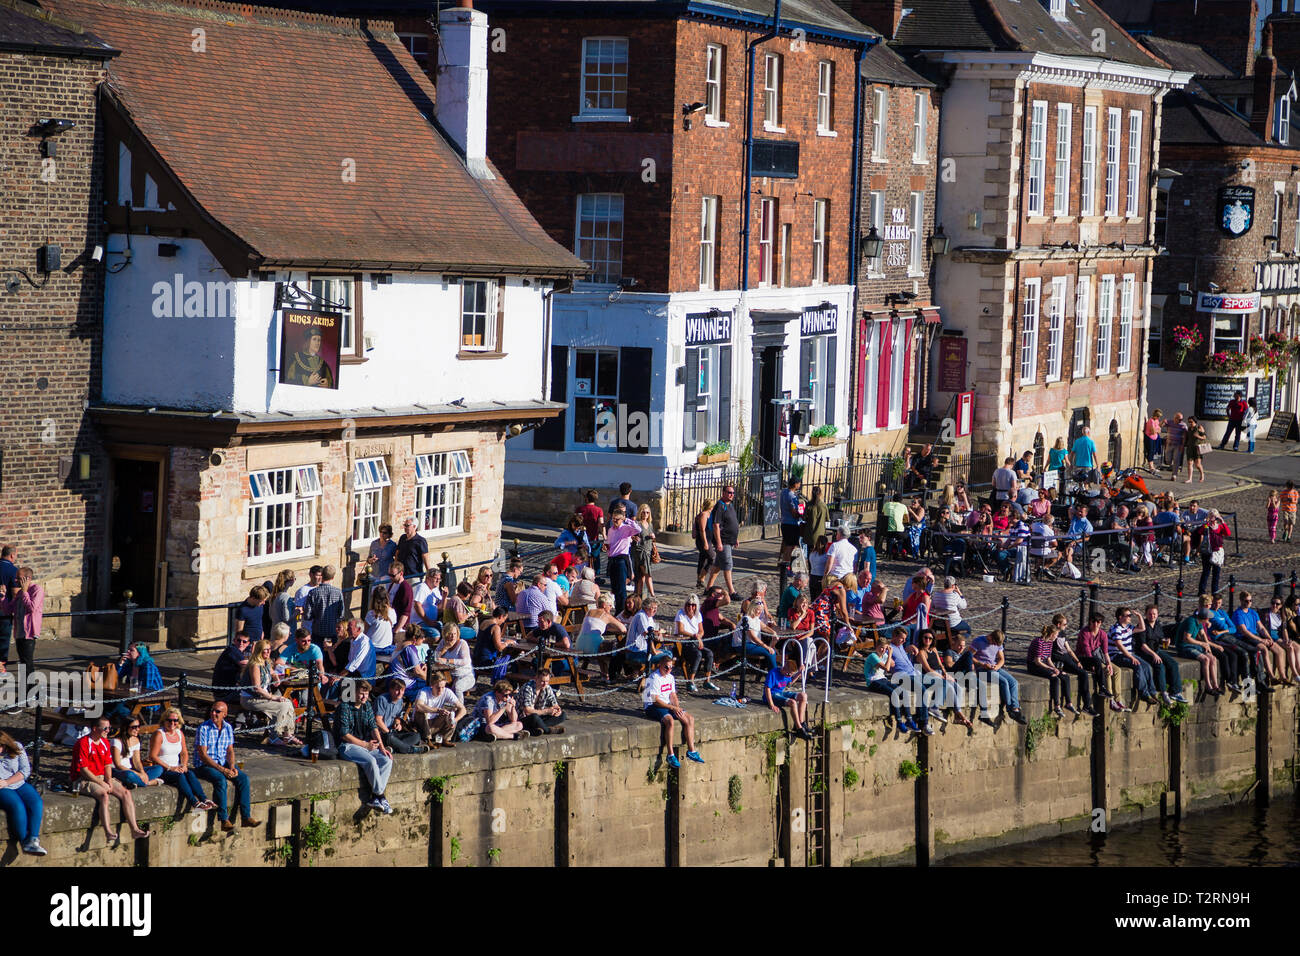 York, North Yorkshire. Kings Arms pub by the River Ouse, people having a drink and enjoying the sun. Stock Photo